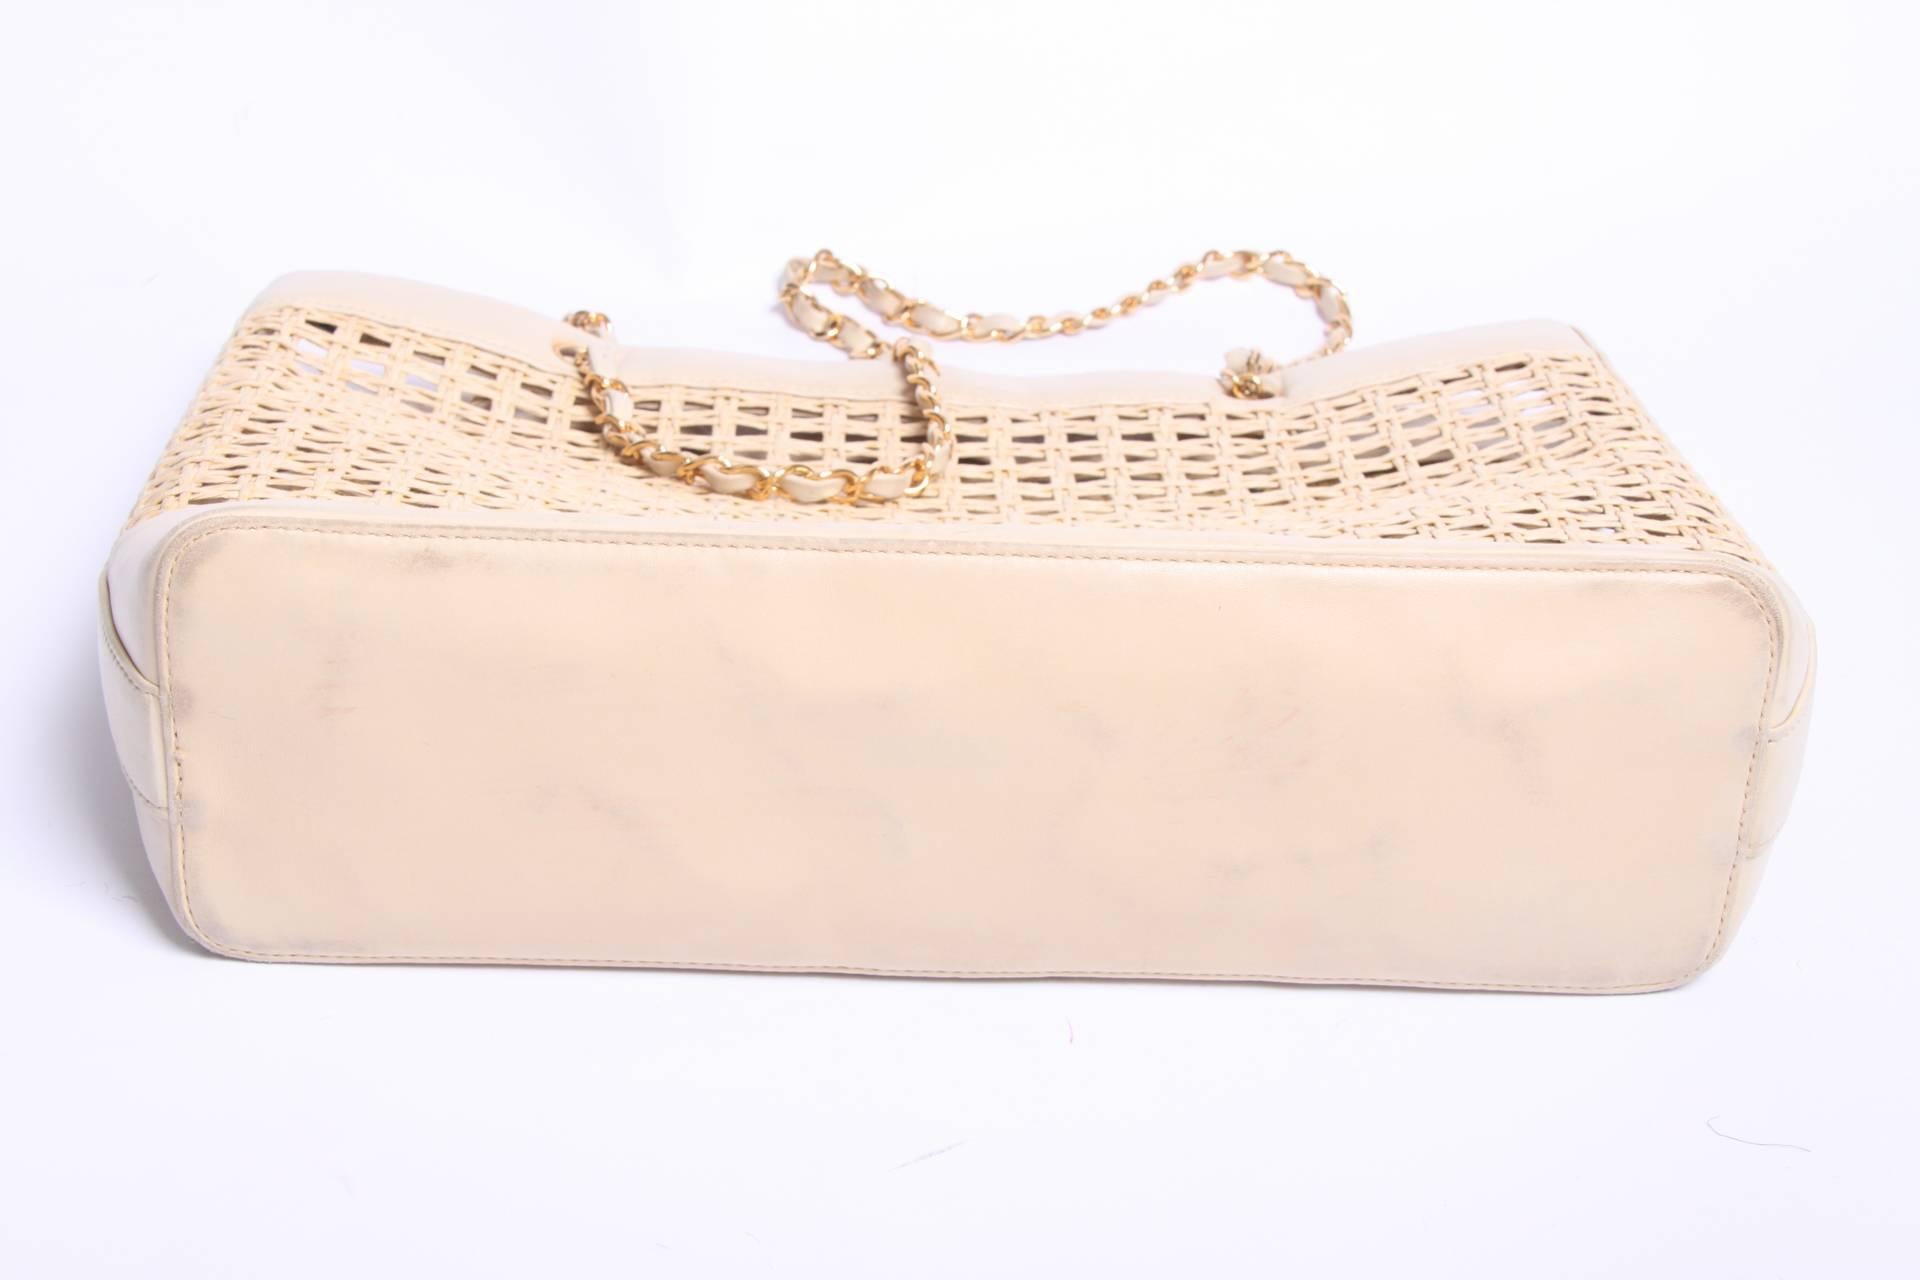 Ooooh, another sweet item! A vintage Chanel bag from 1996 made of beige lambskin leather and fine woven straw.

Summery bag, perfect to wear to the beach. Two long golden chains (80 centimeters) to wear on the shoulder entwined with leather. Top